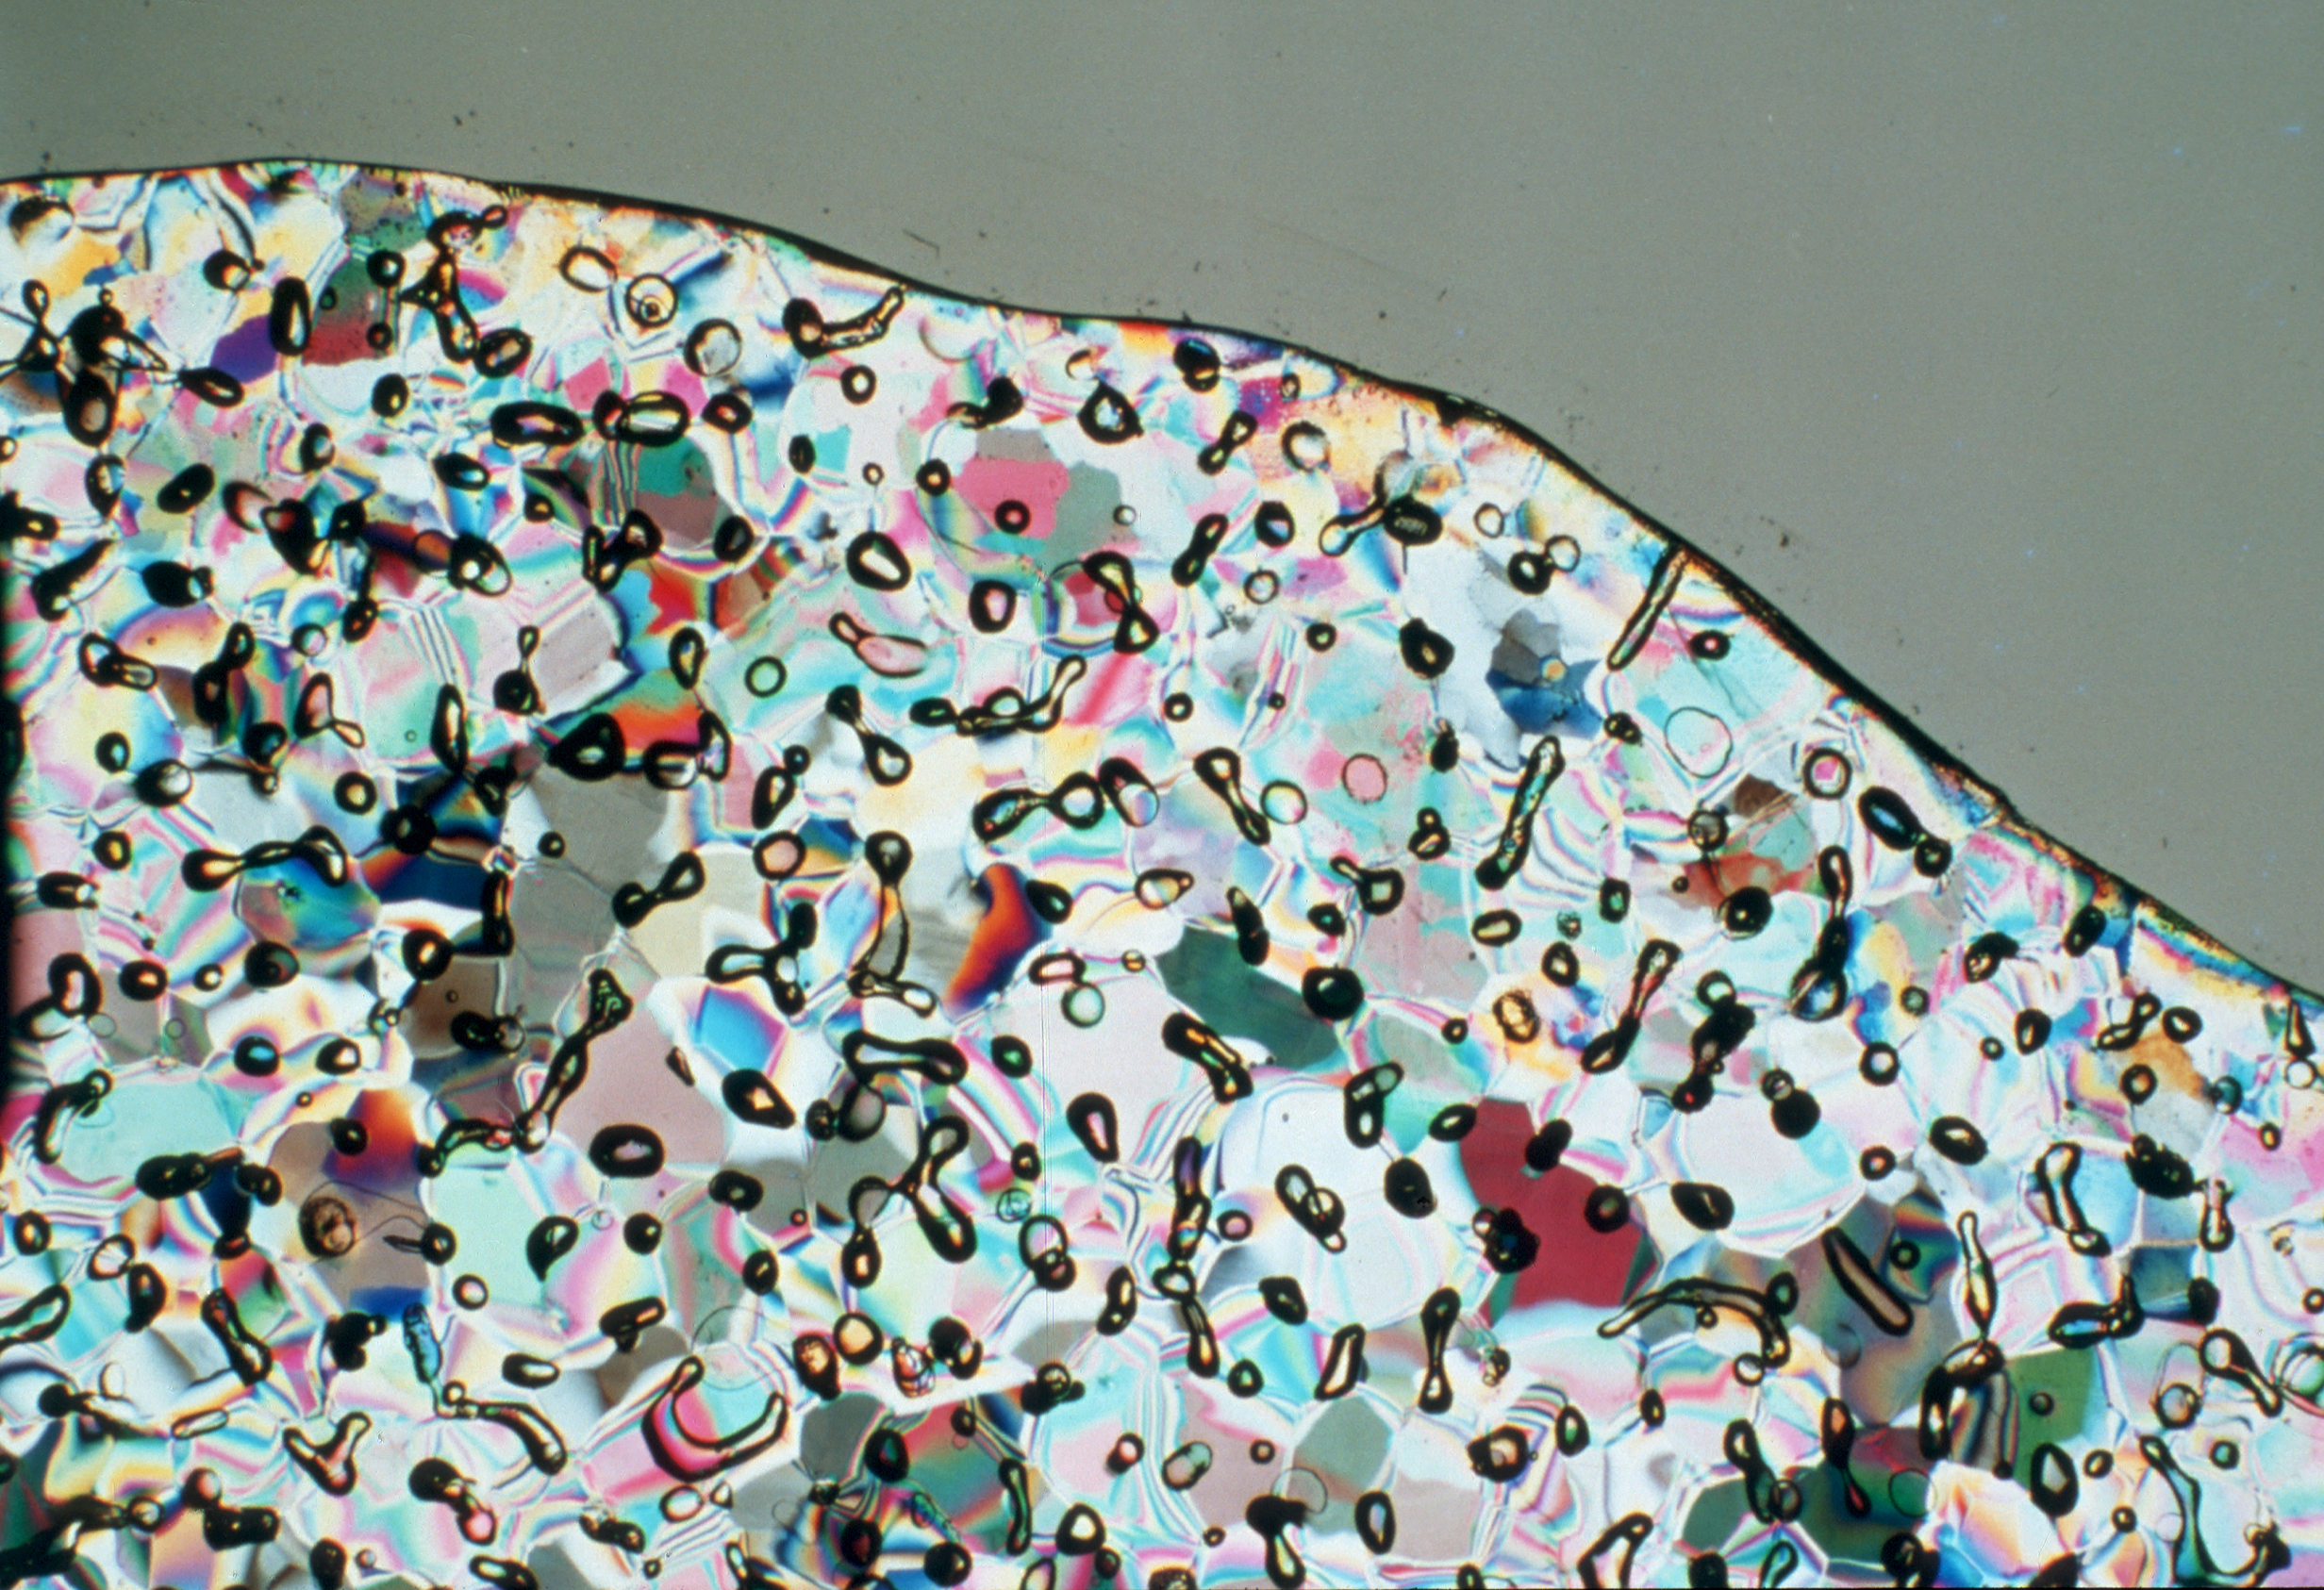 A thin section of Antarctic ice showing hundreds of tiny trapped air bubbles. The ice is illuminated with polarized light, producing a colorful effect.